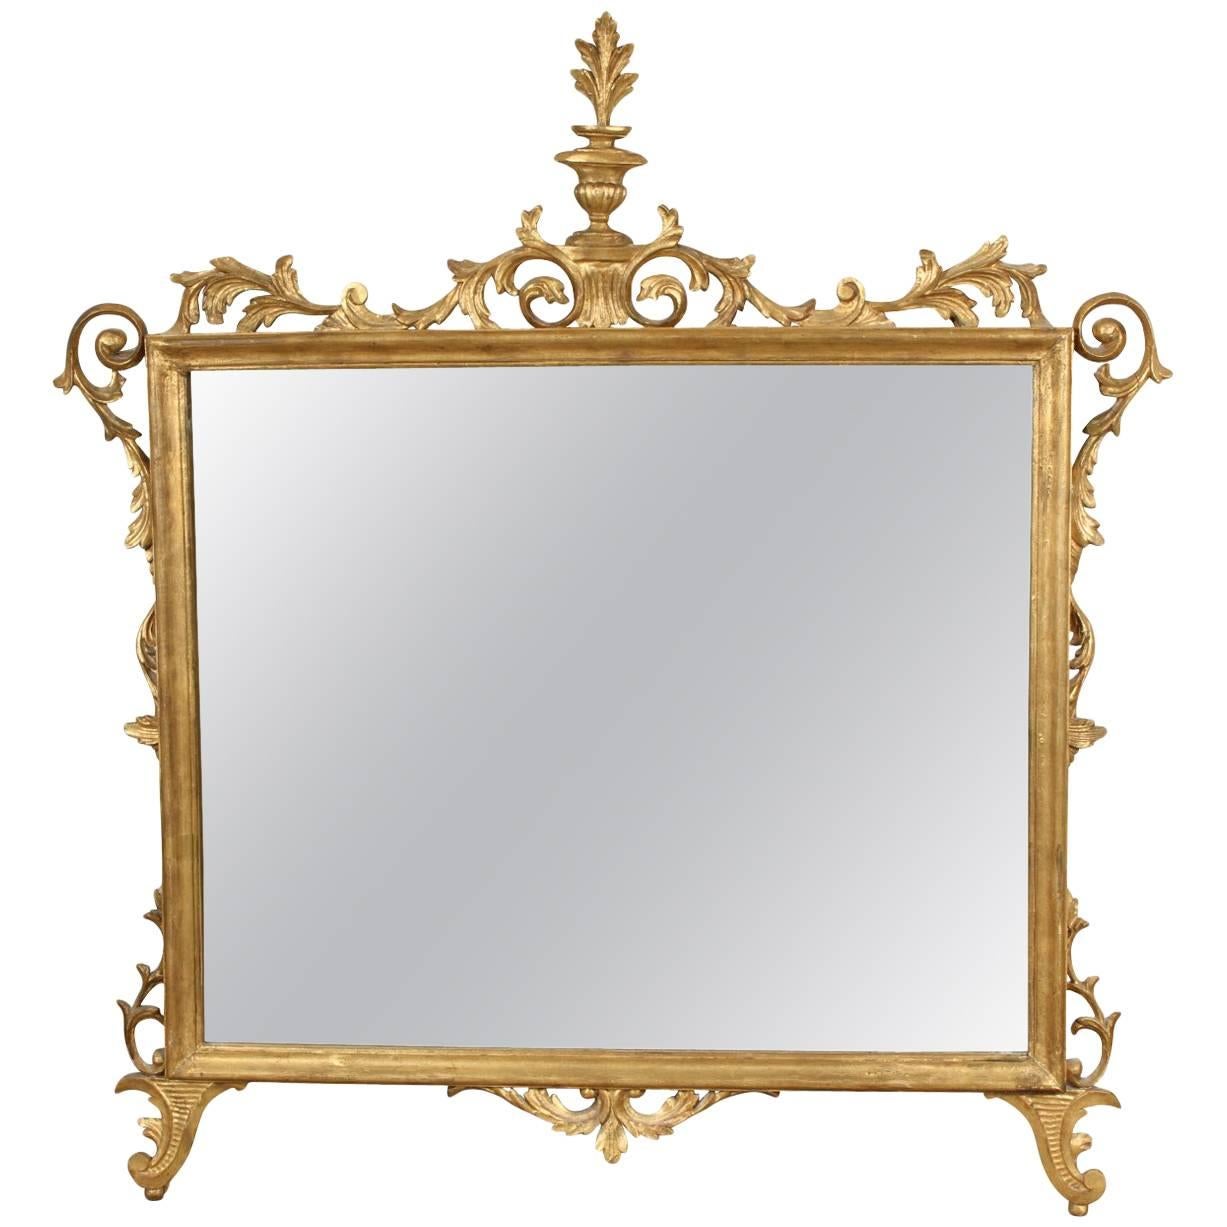 Large-Scale Carved and Giltwood Mirror